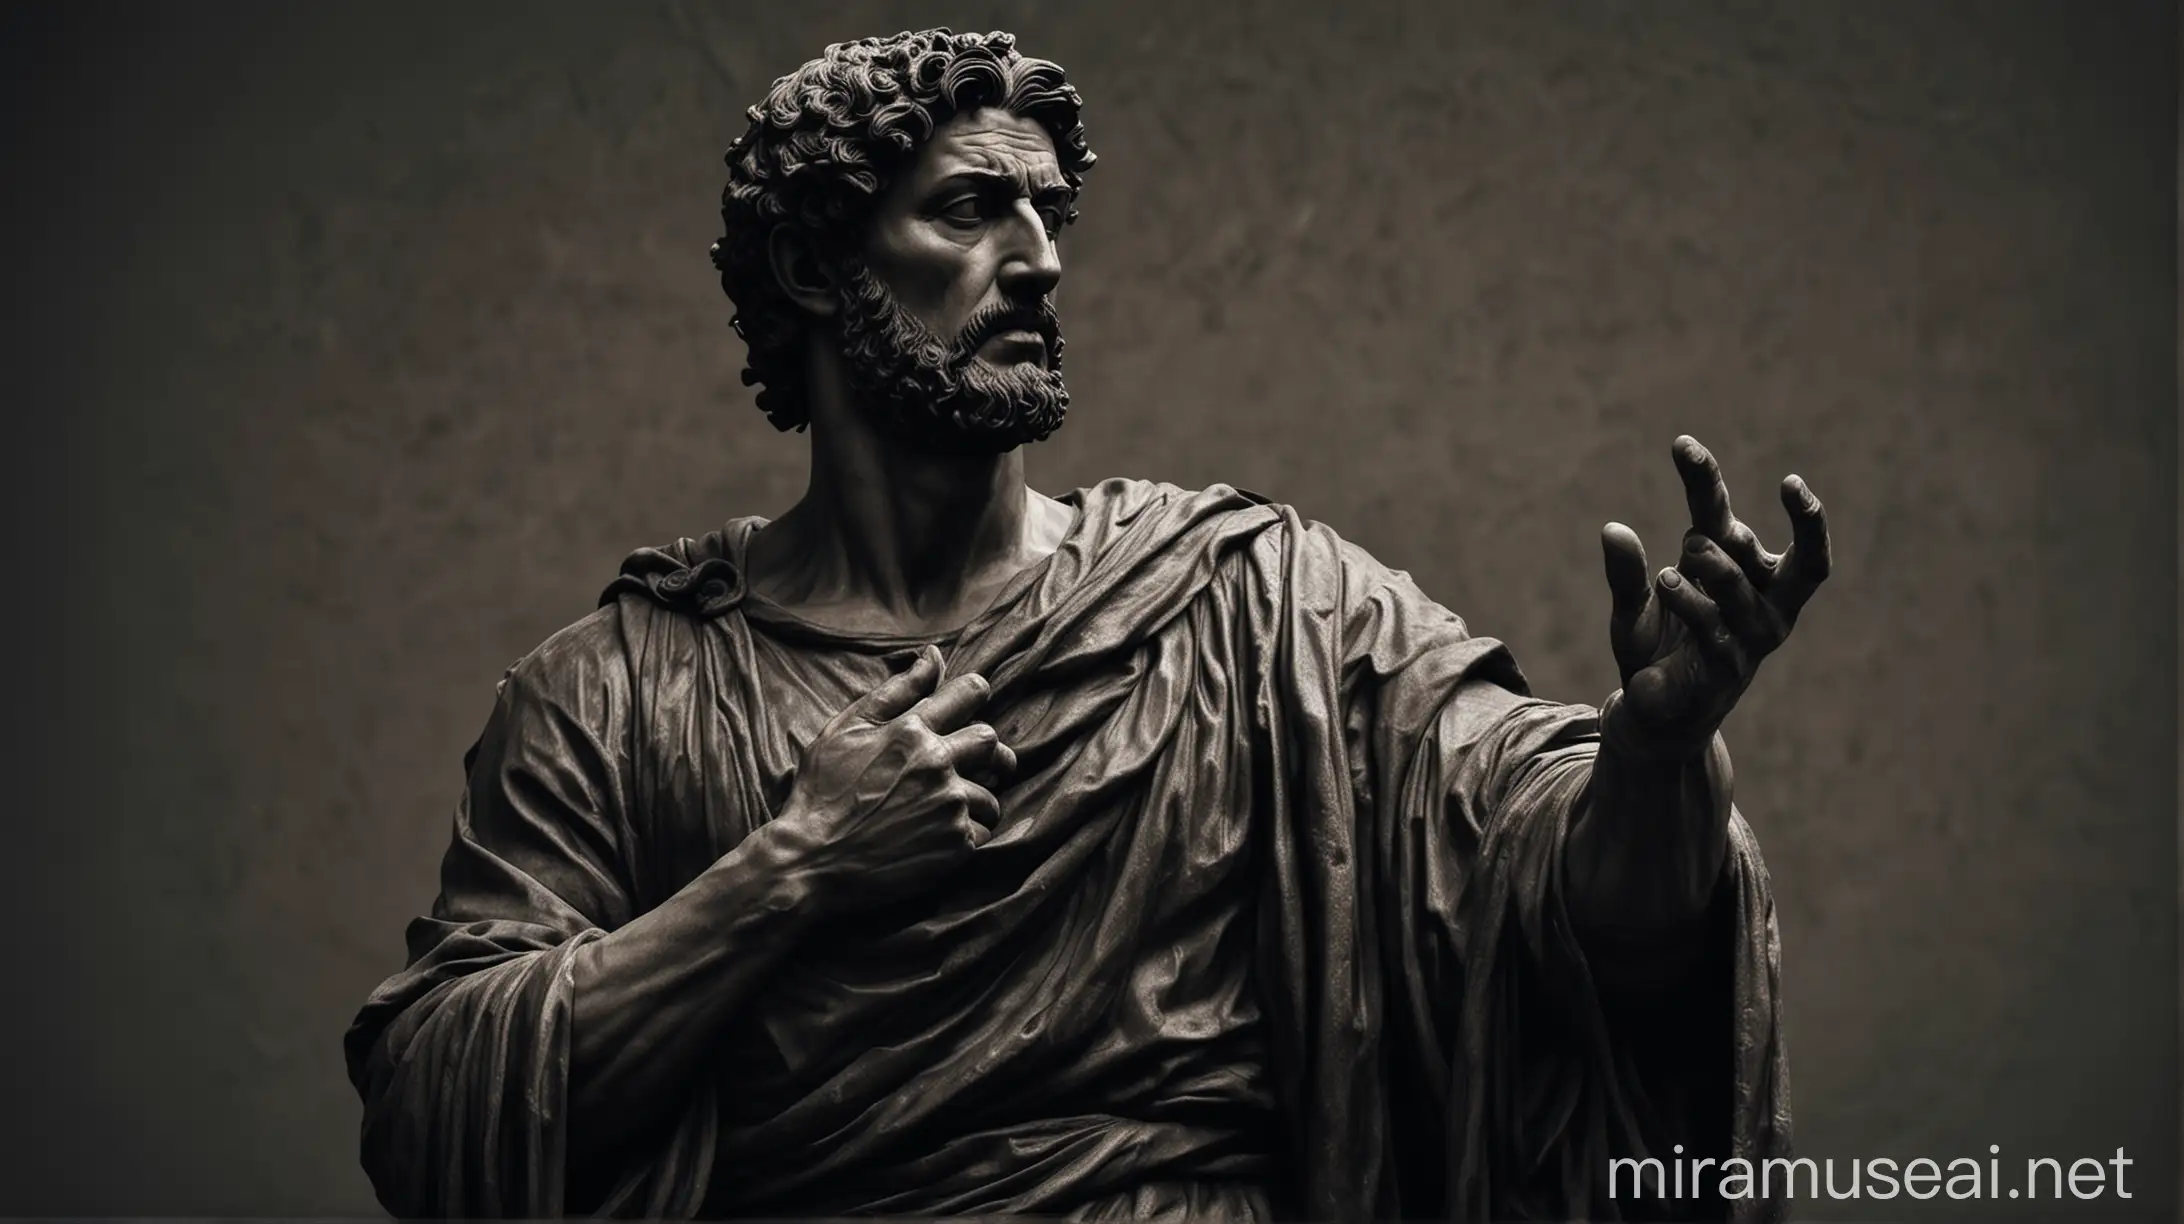 Stoic Statue Images 16:9 unique dark masculinity attention stealler.